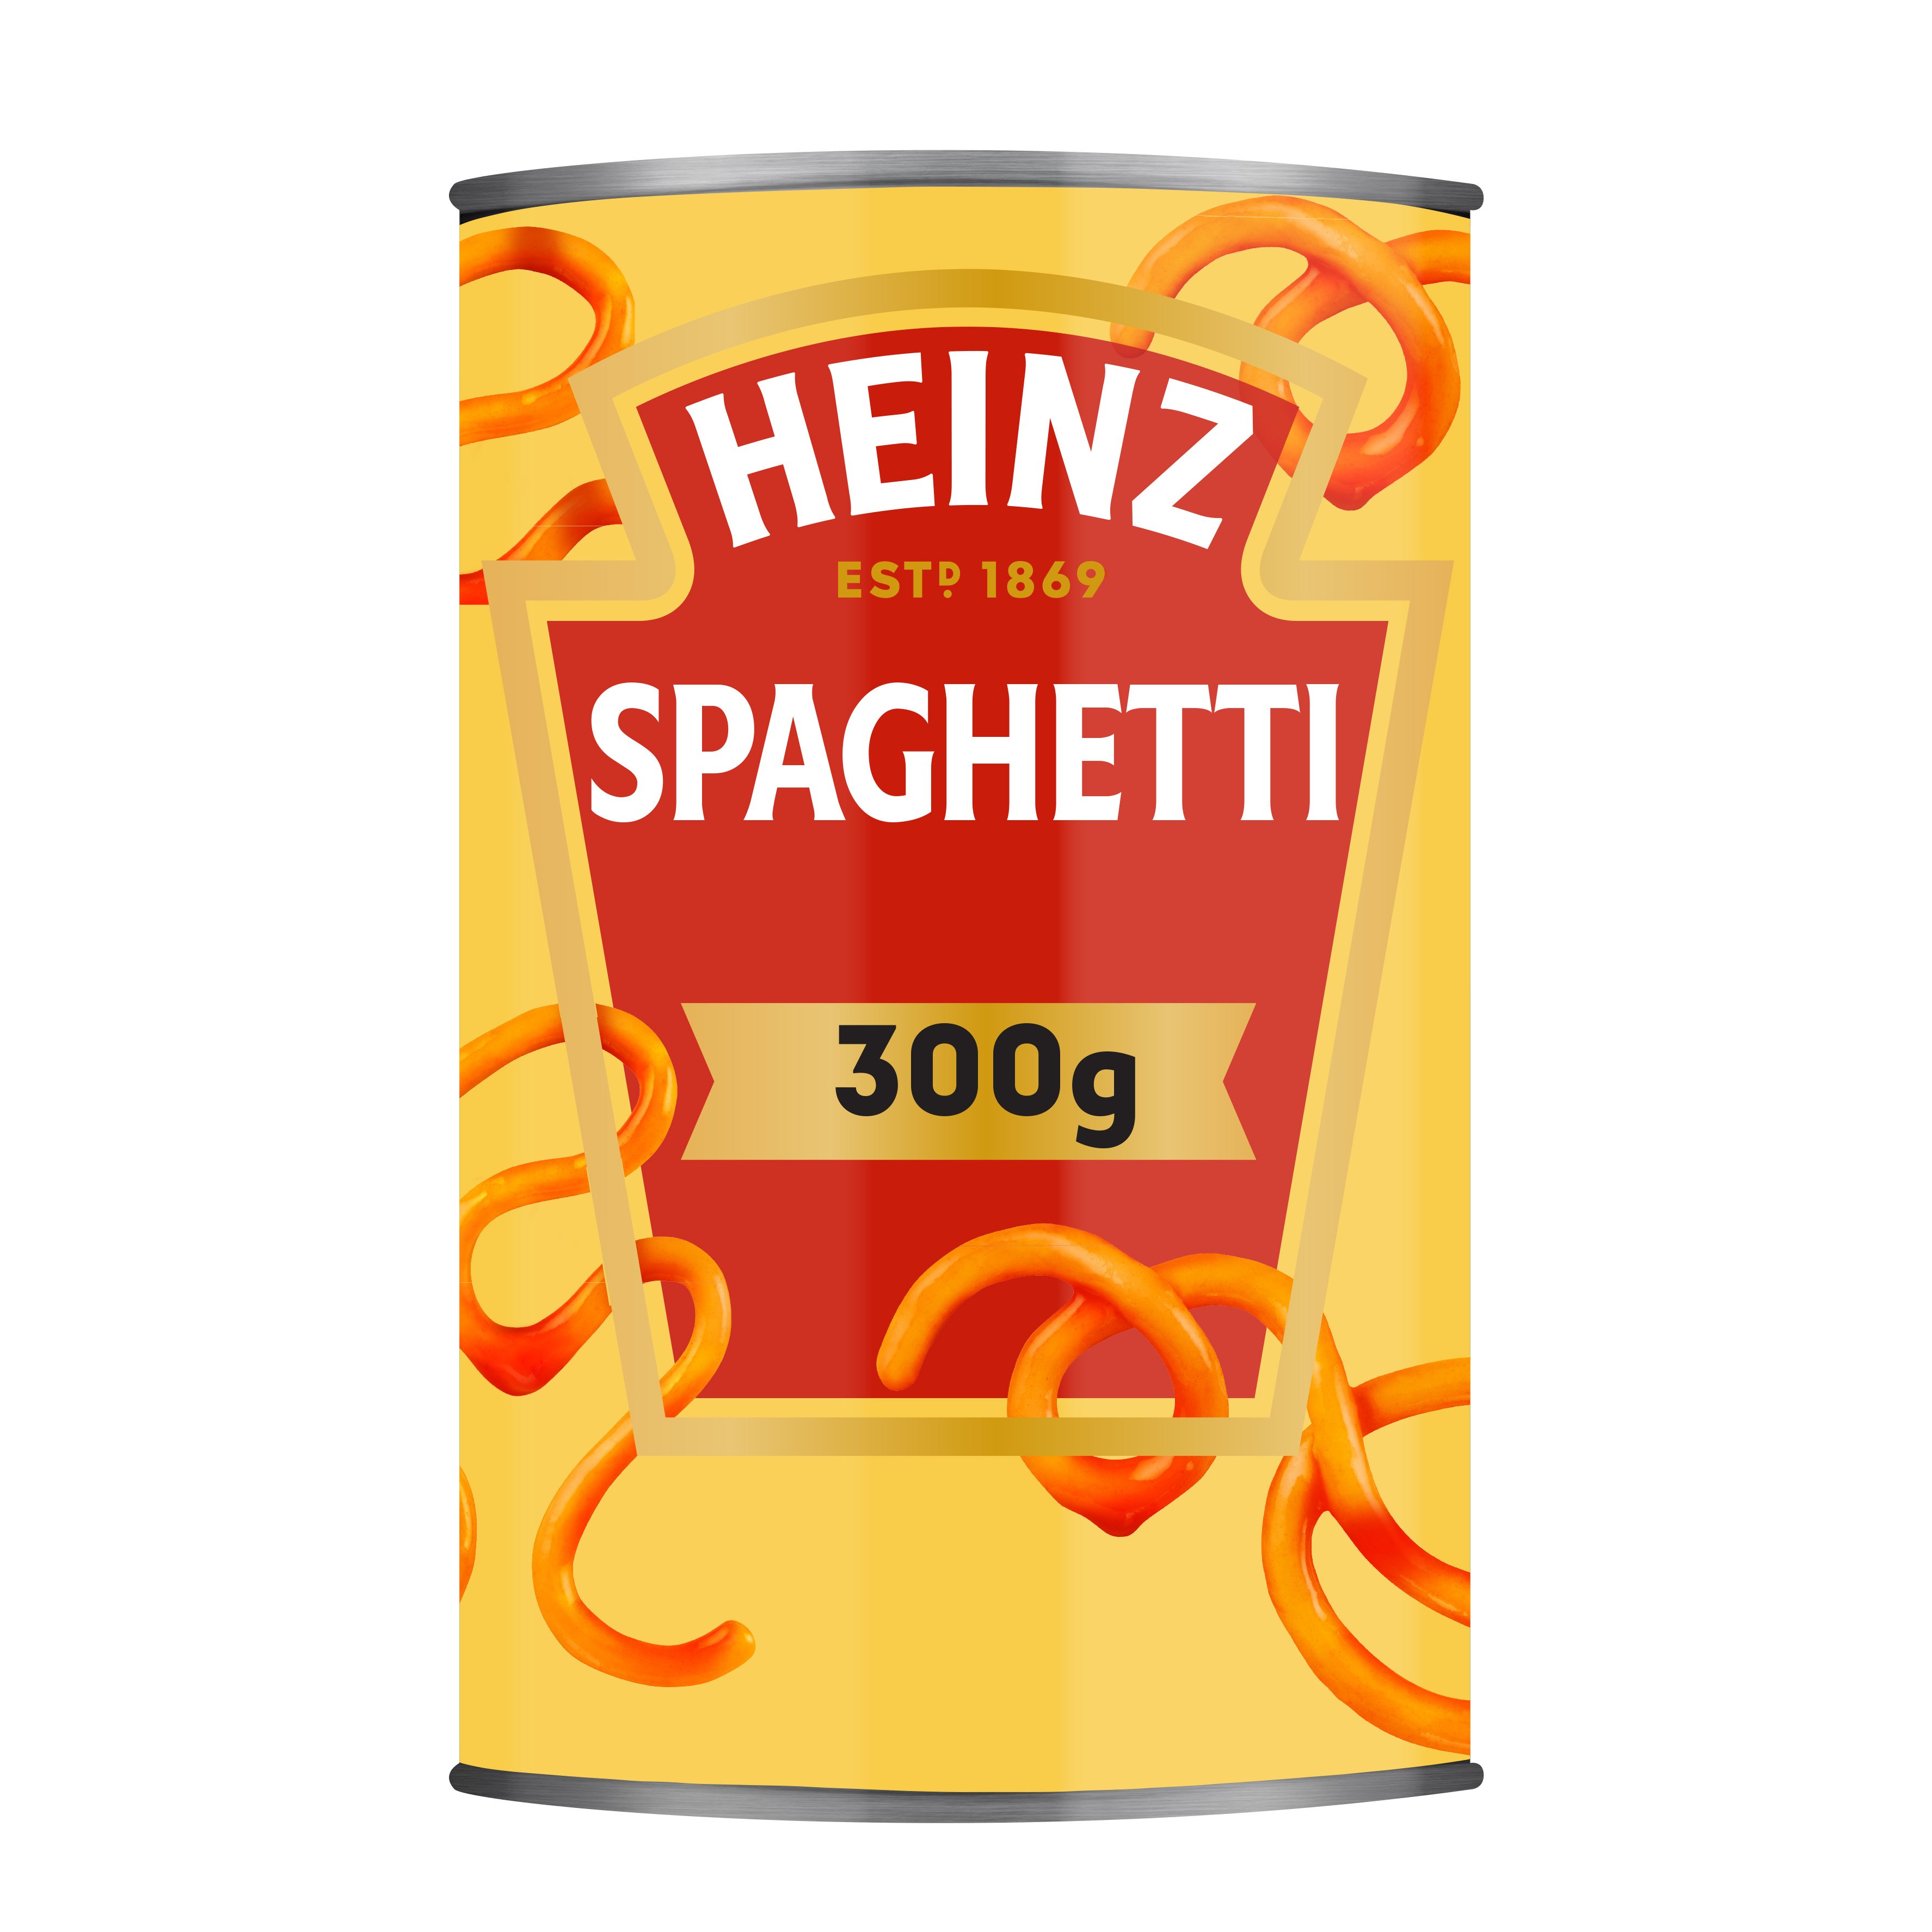 Photograph of 2 x 300g Heinz Spaghetti in Tomato Sauce product